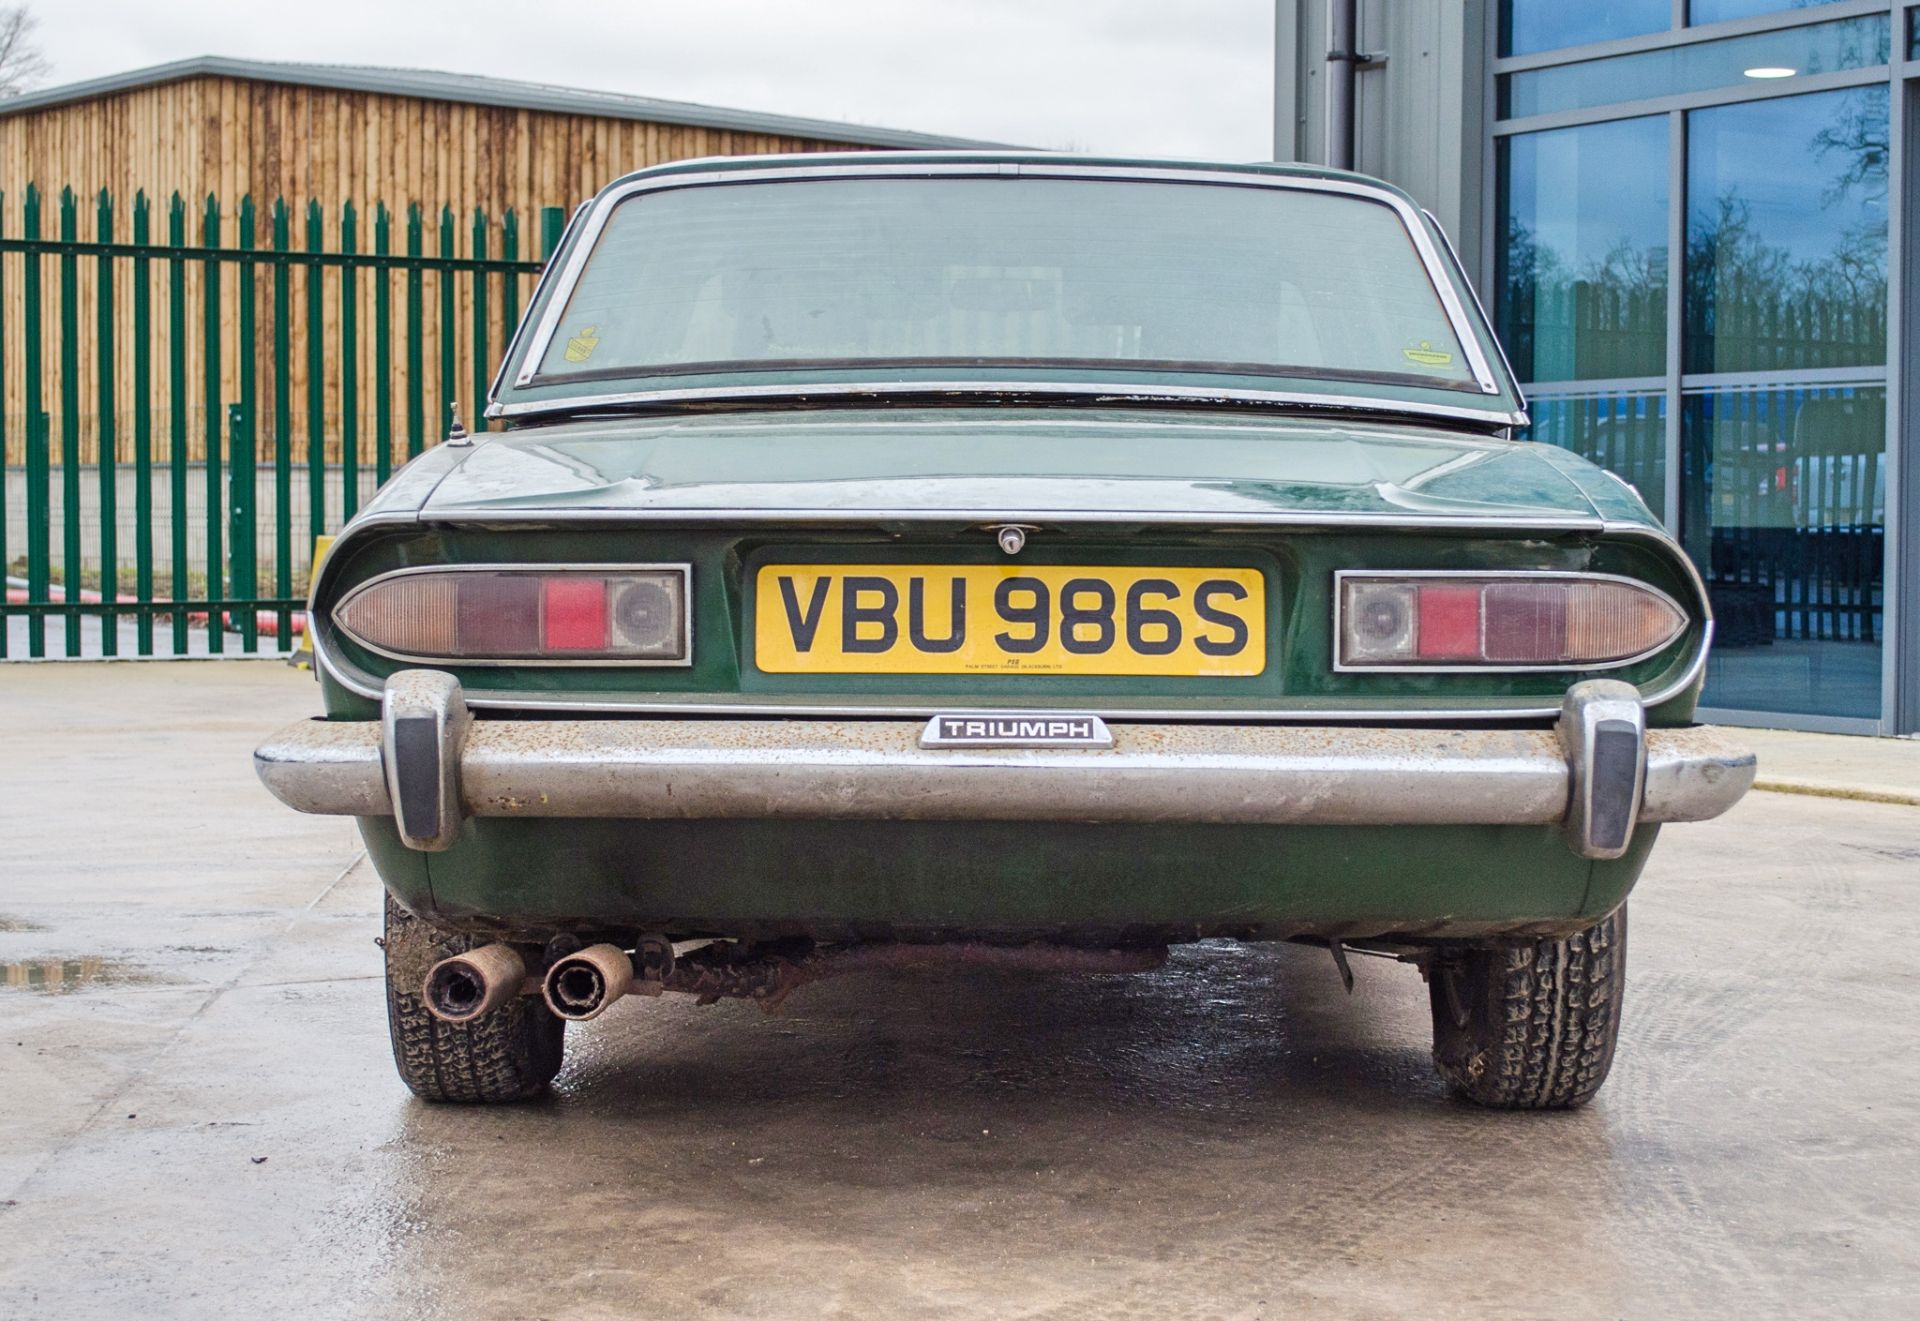 1978 Triumph Stag 3 litre manual 2 door convertible Barn Find - Image 11 of 57